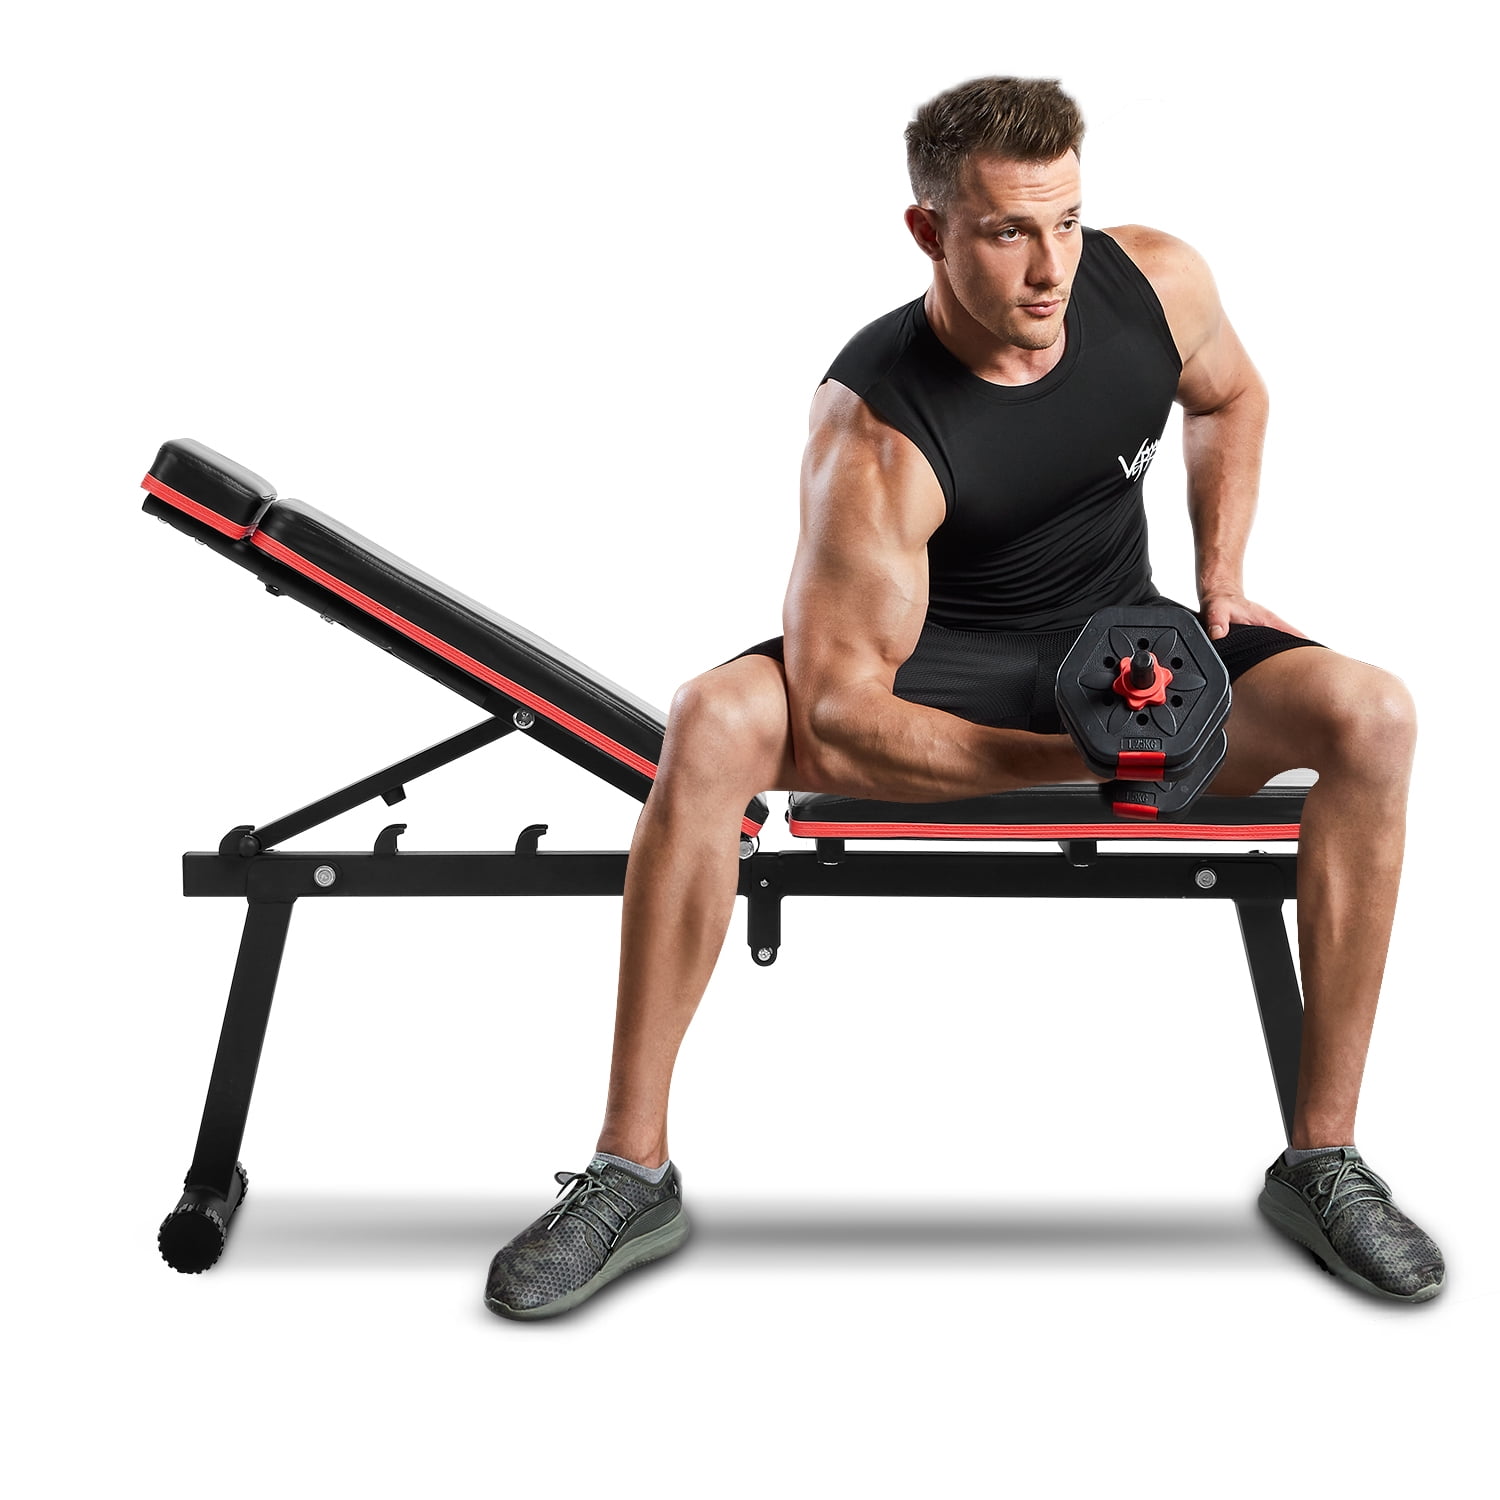 Foldable Exercise Bench for Strength Training Exercise Workout Bench for Full Body Workout Adjustable Weight Bench Multi-Purpose Foldable Bench Folding Dumbbells Bench 300lbs 